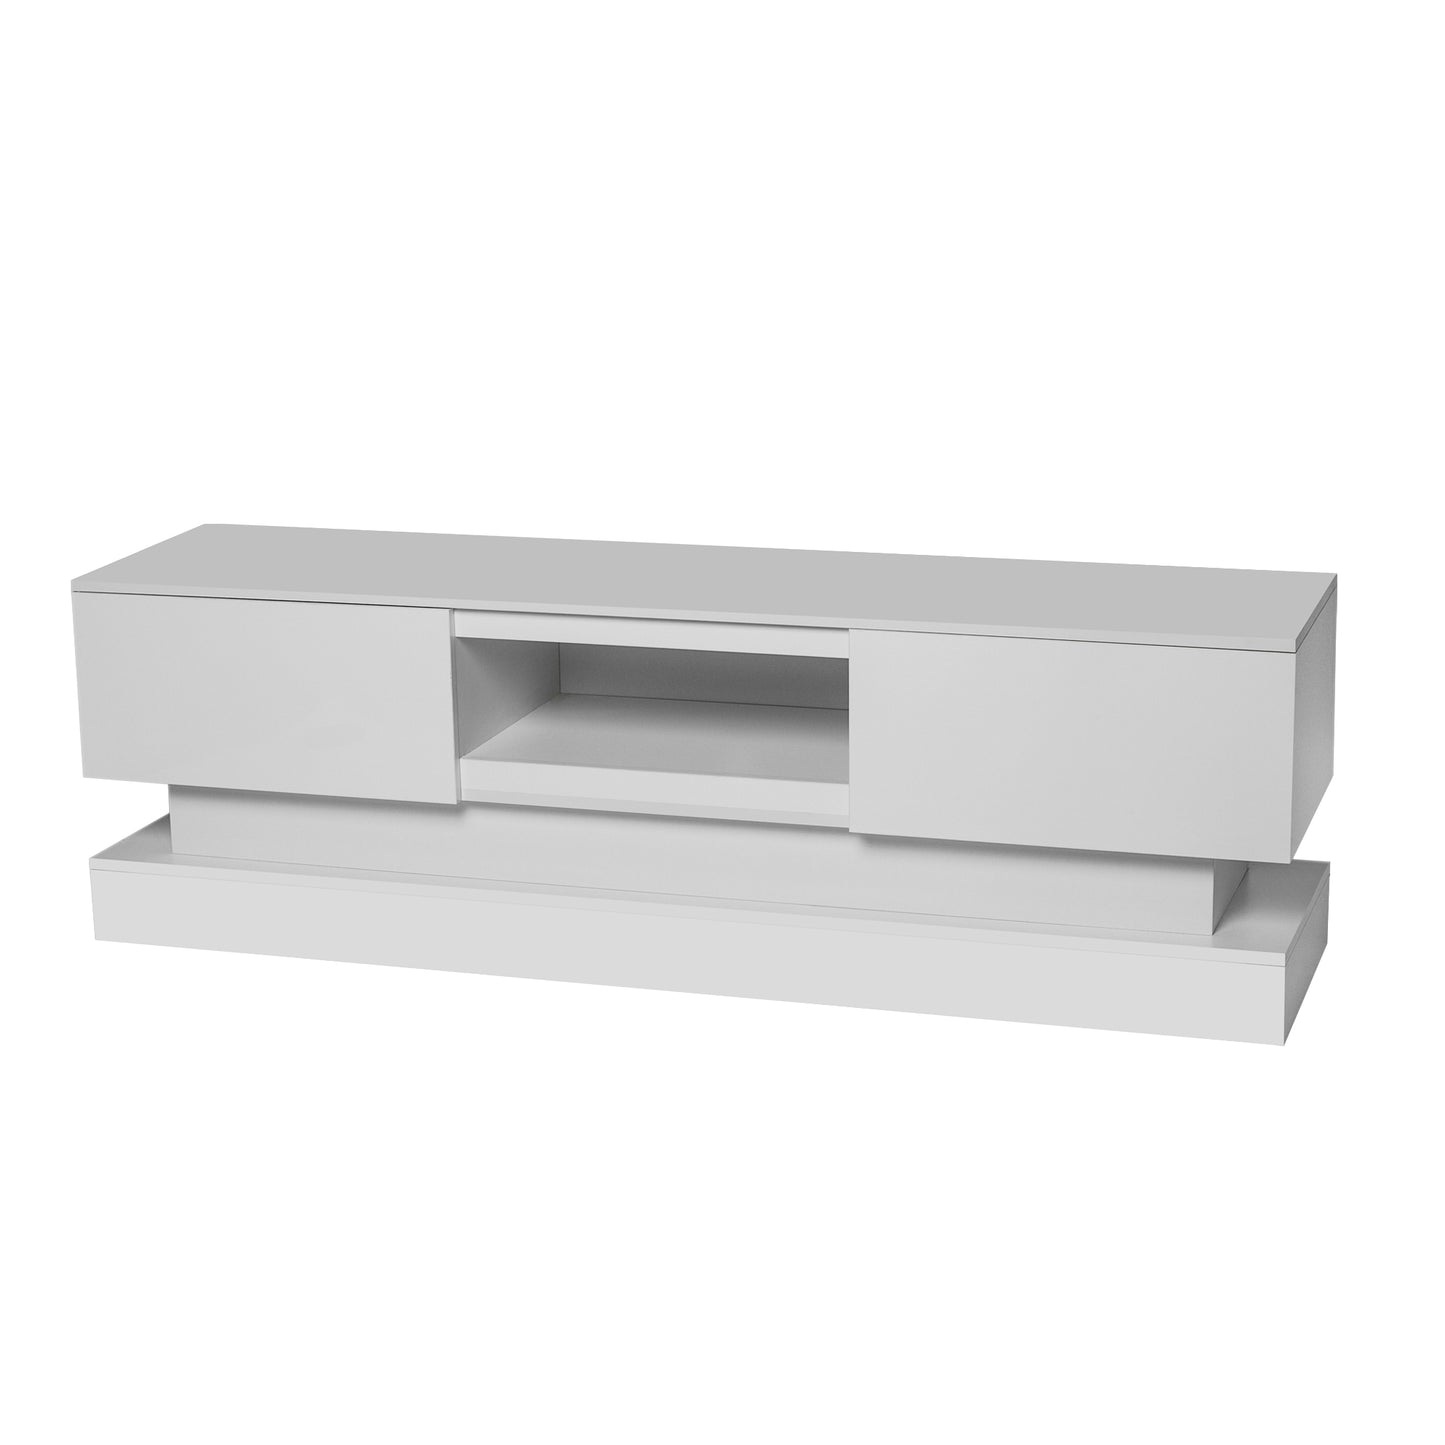 White TV Stand for 65" TVs, HSUNNS High Glossy Front TV Cabinet with 16 RGB Lights, Entertainment Center Media TV Console with 2 Drawers for Living Room Bedroom, Size: 63x16x20in